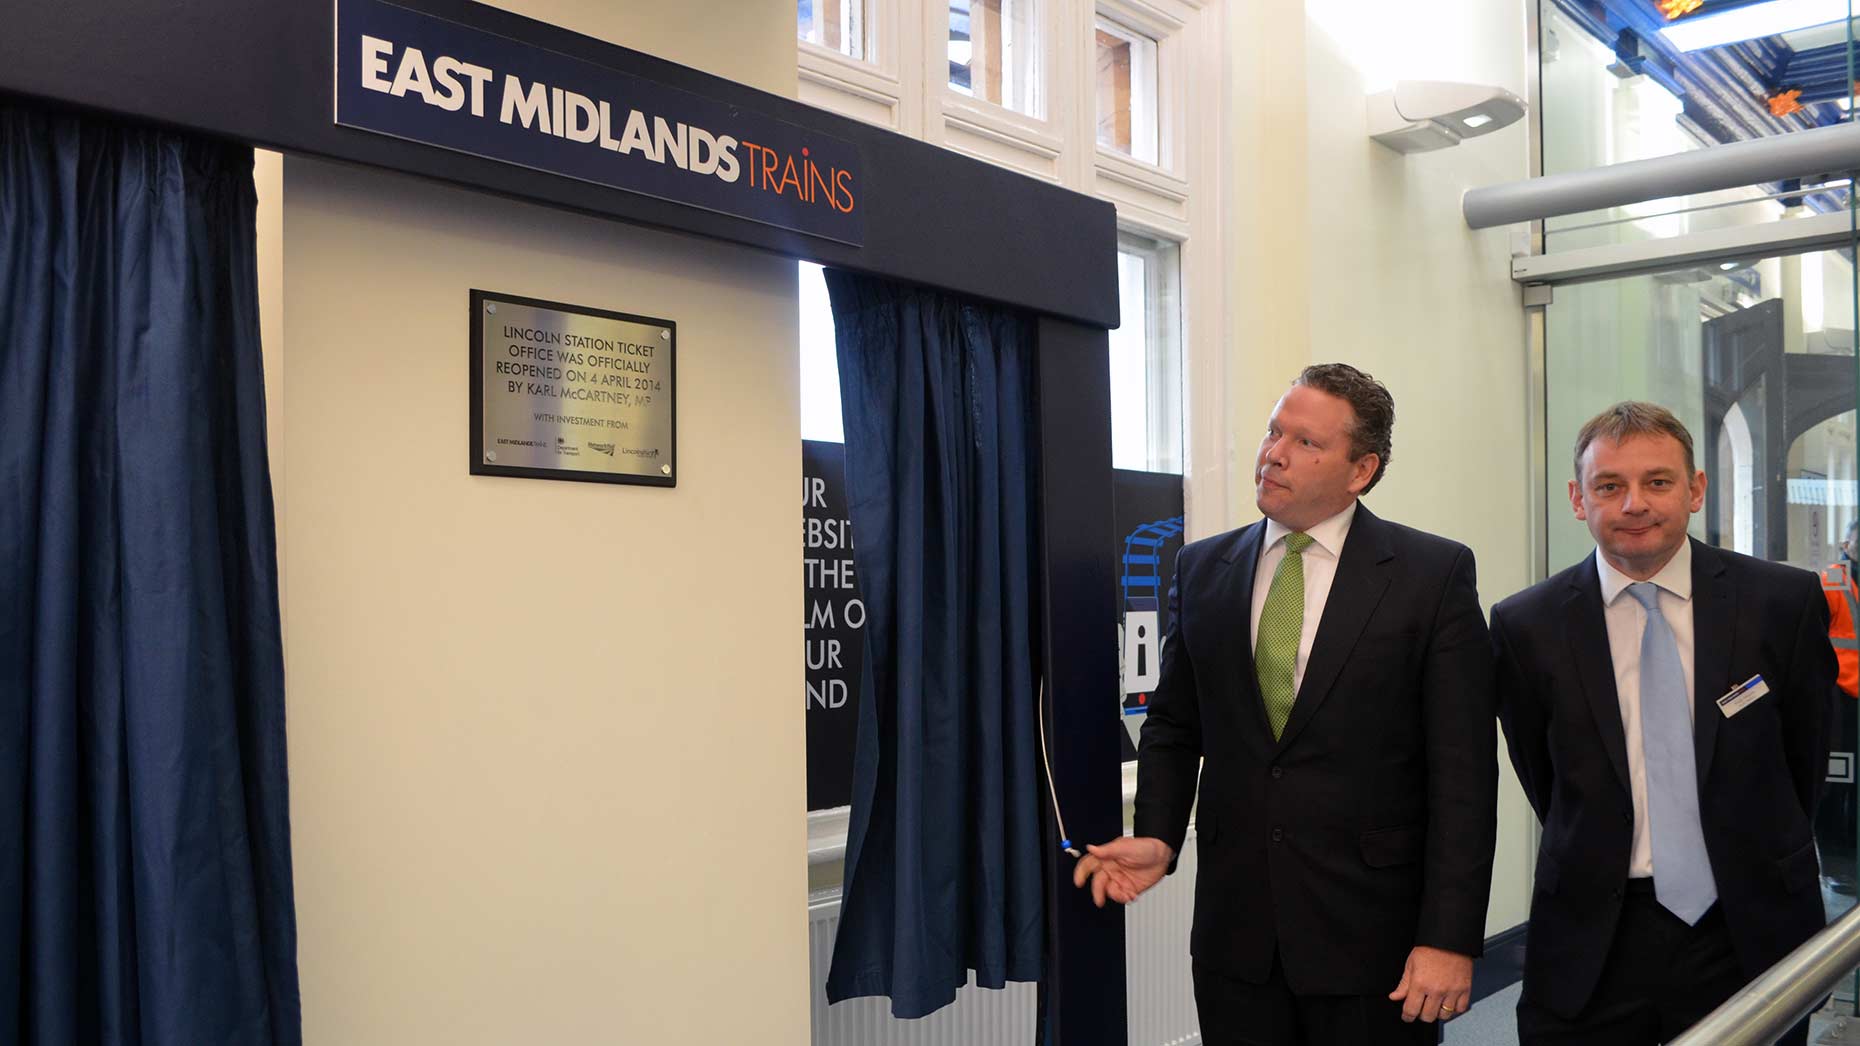 Karl McCartney unveiled a new plaque for the revamped Lincoln train station in April 2014.